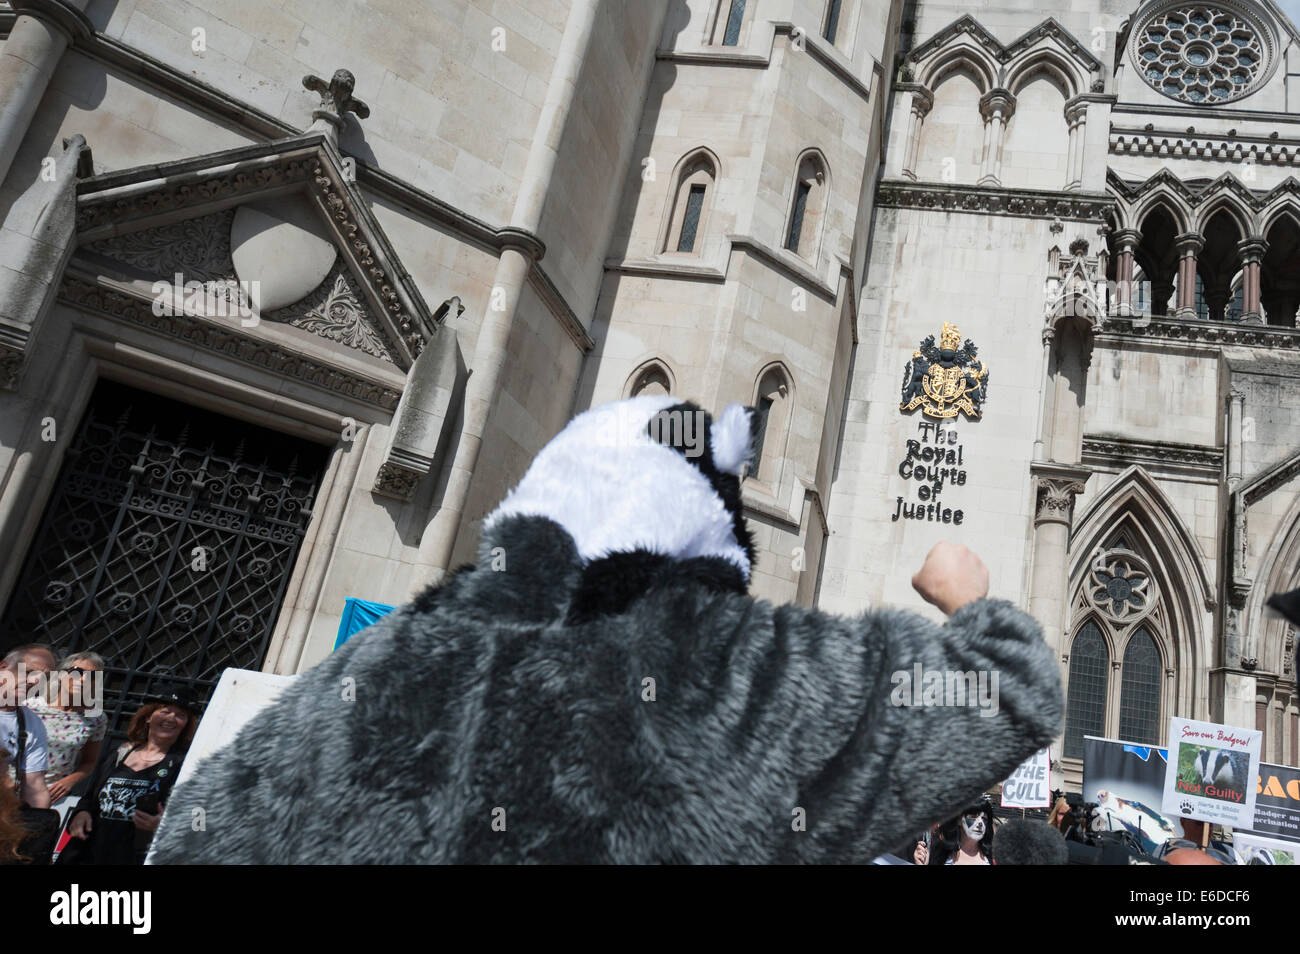 Royal Courts of Justice, London, UK. 21st August 2014. A large crowd of anti badger cull protesters gathered outside the Royal Courts of Justice as The Badger Trust was in court with a new legal challenge over the government’s badger cull policy. The organisation wants a High Court ruling stating that there has been an unlawful failure to put in place an independent panel of experts to oversee this year’s planned cull in Gloucestershire and Somerset. Credit:  Lee Thomas/Alamy Live News Stock Photo